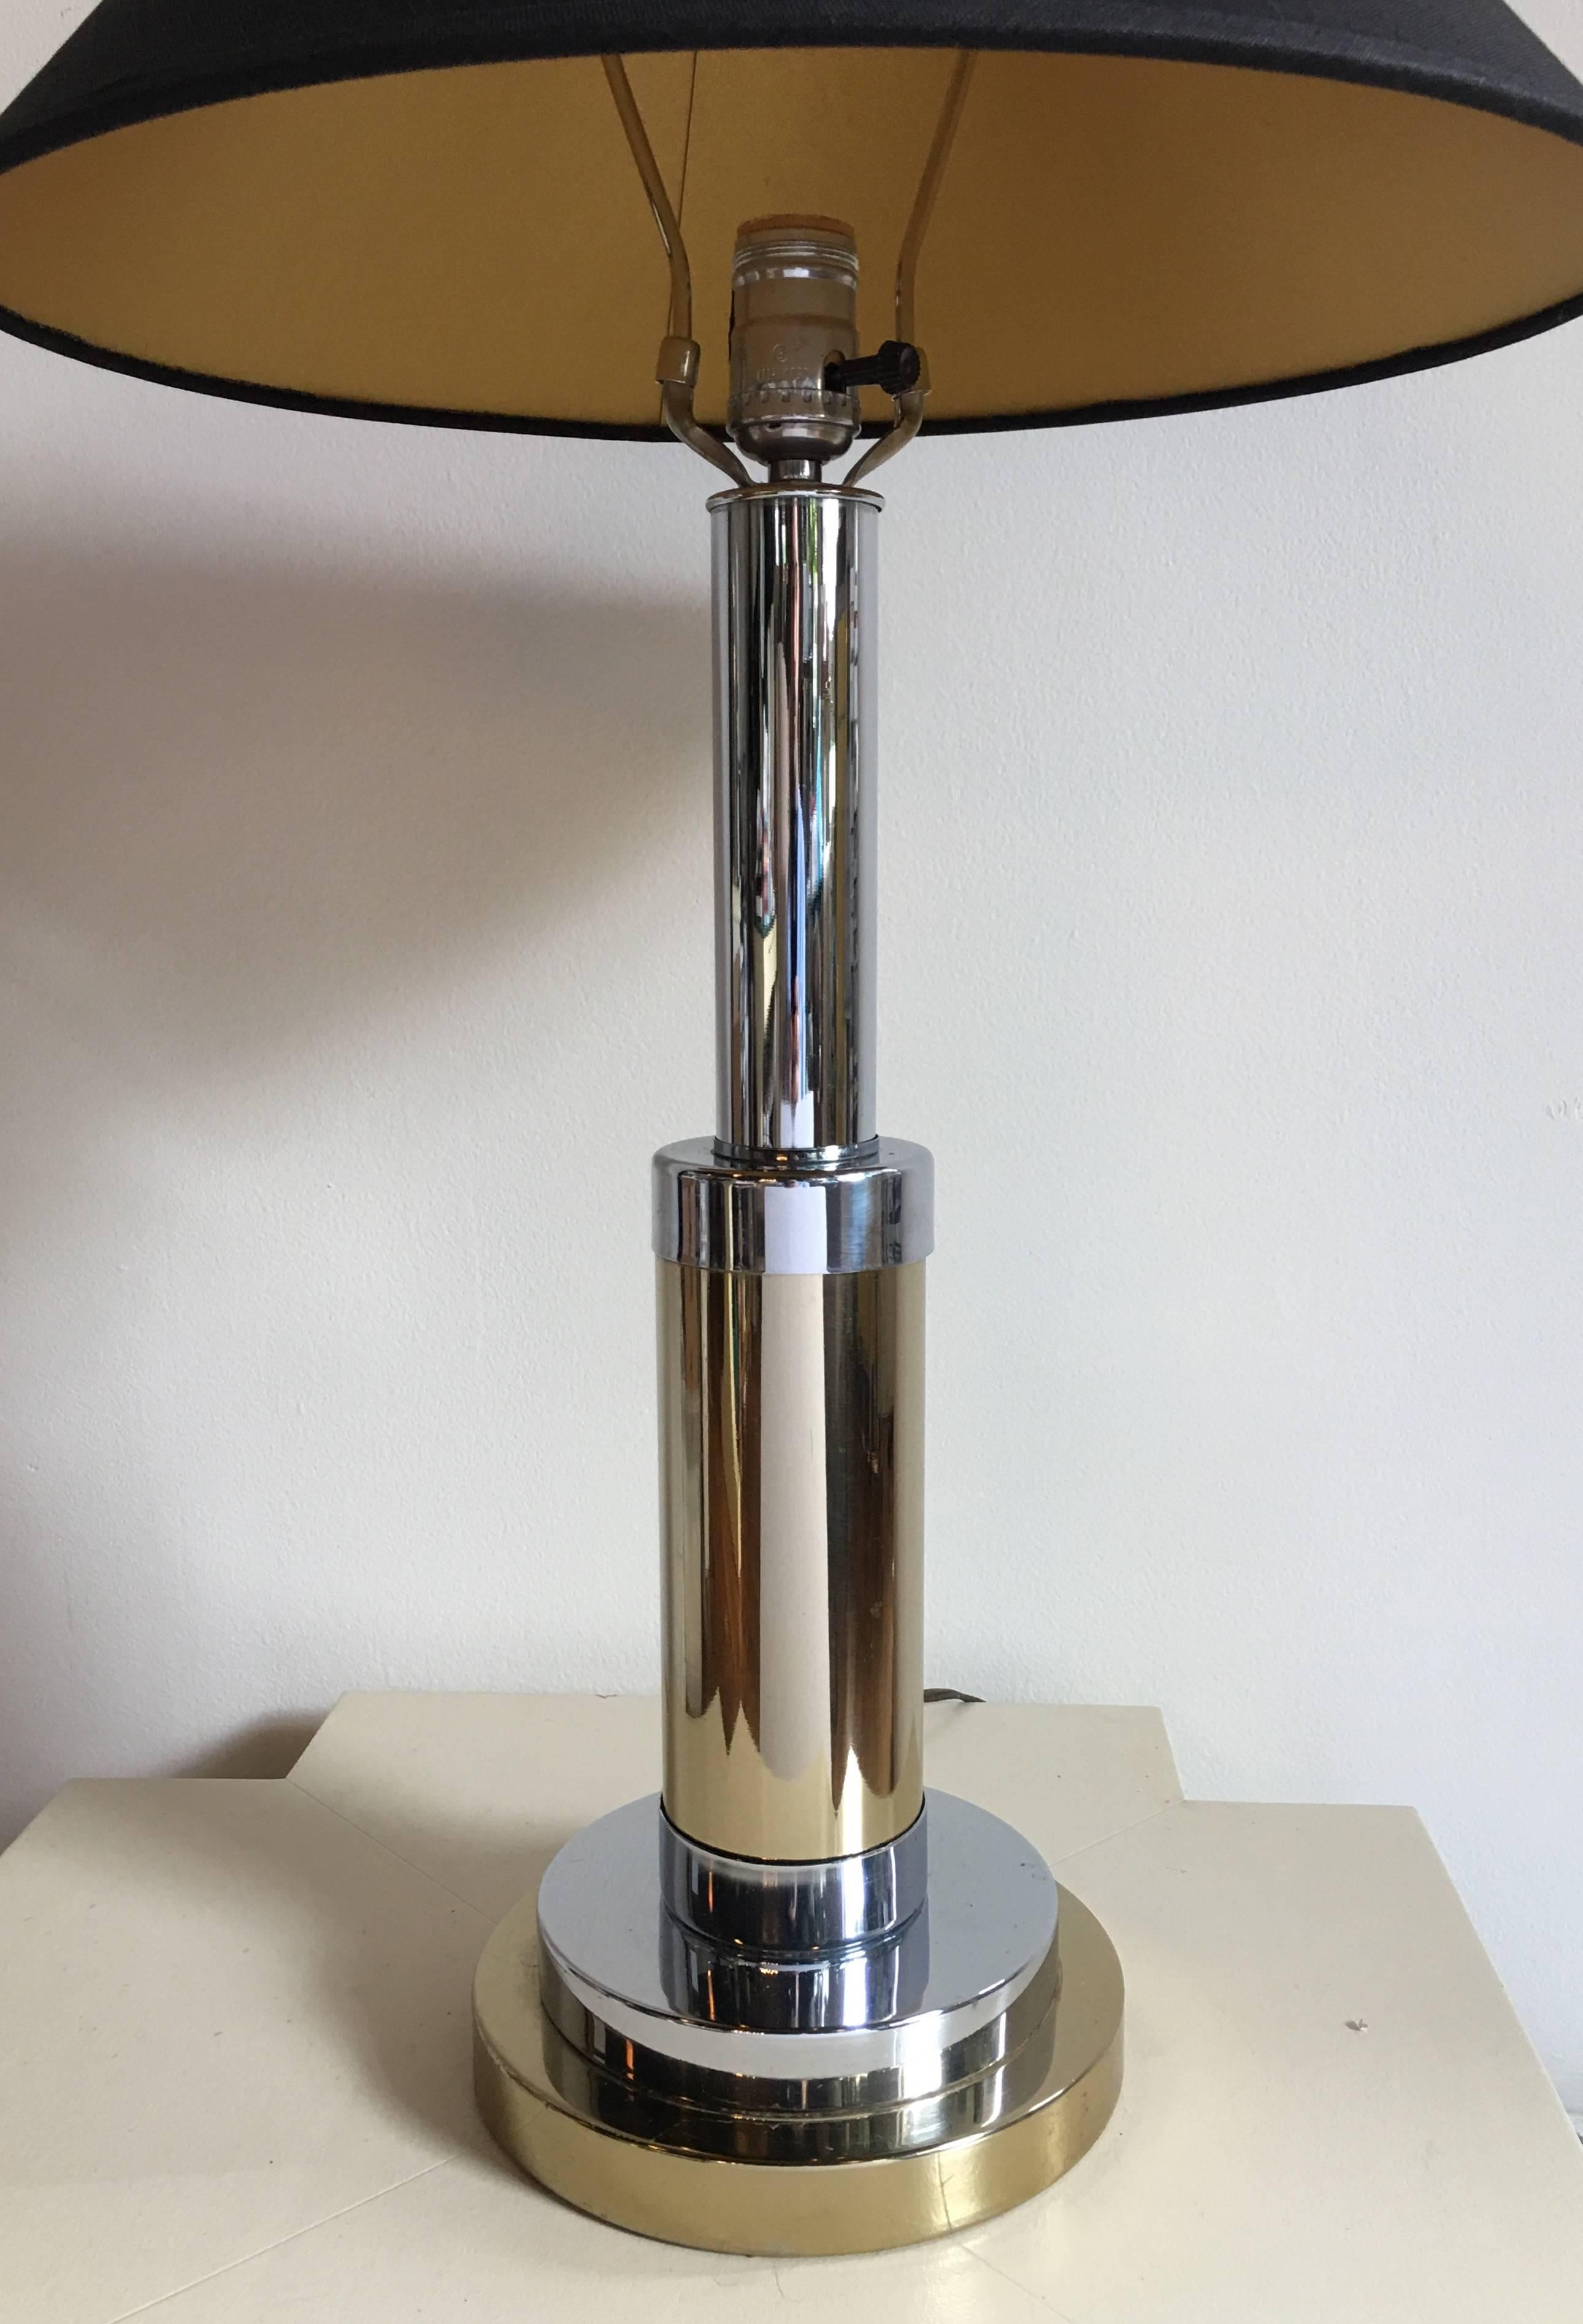 Mid-Century Modern brass and chrome table lamp by Mutual Sunset Lamp company. Original wiring in working condition. Original manufacturer label on socket. lampshade not included.
Measure: 27 inches high to finial.
20 inches high to socket.